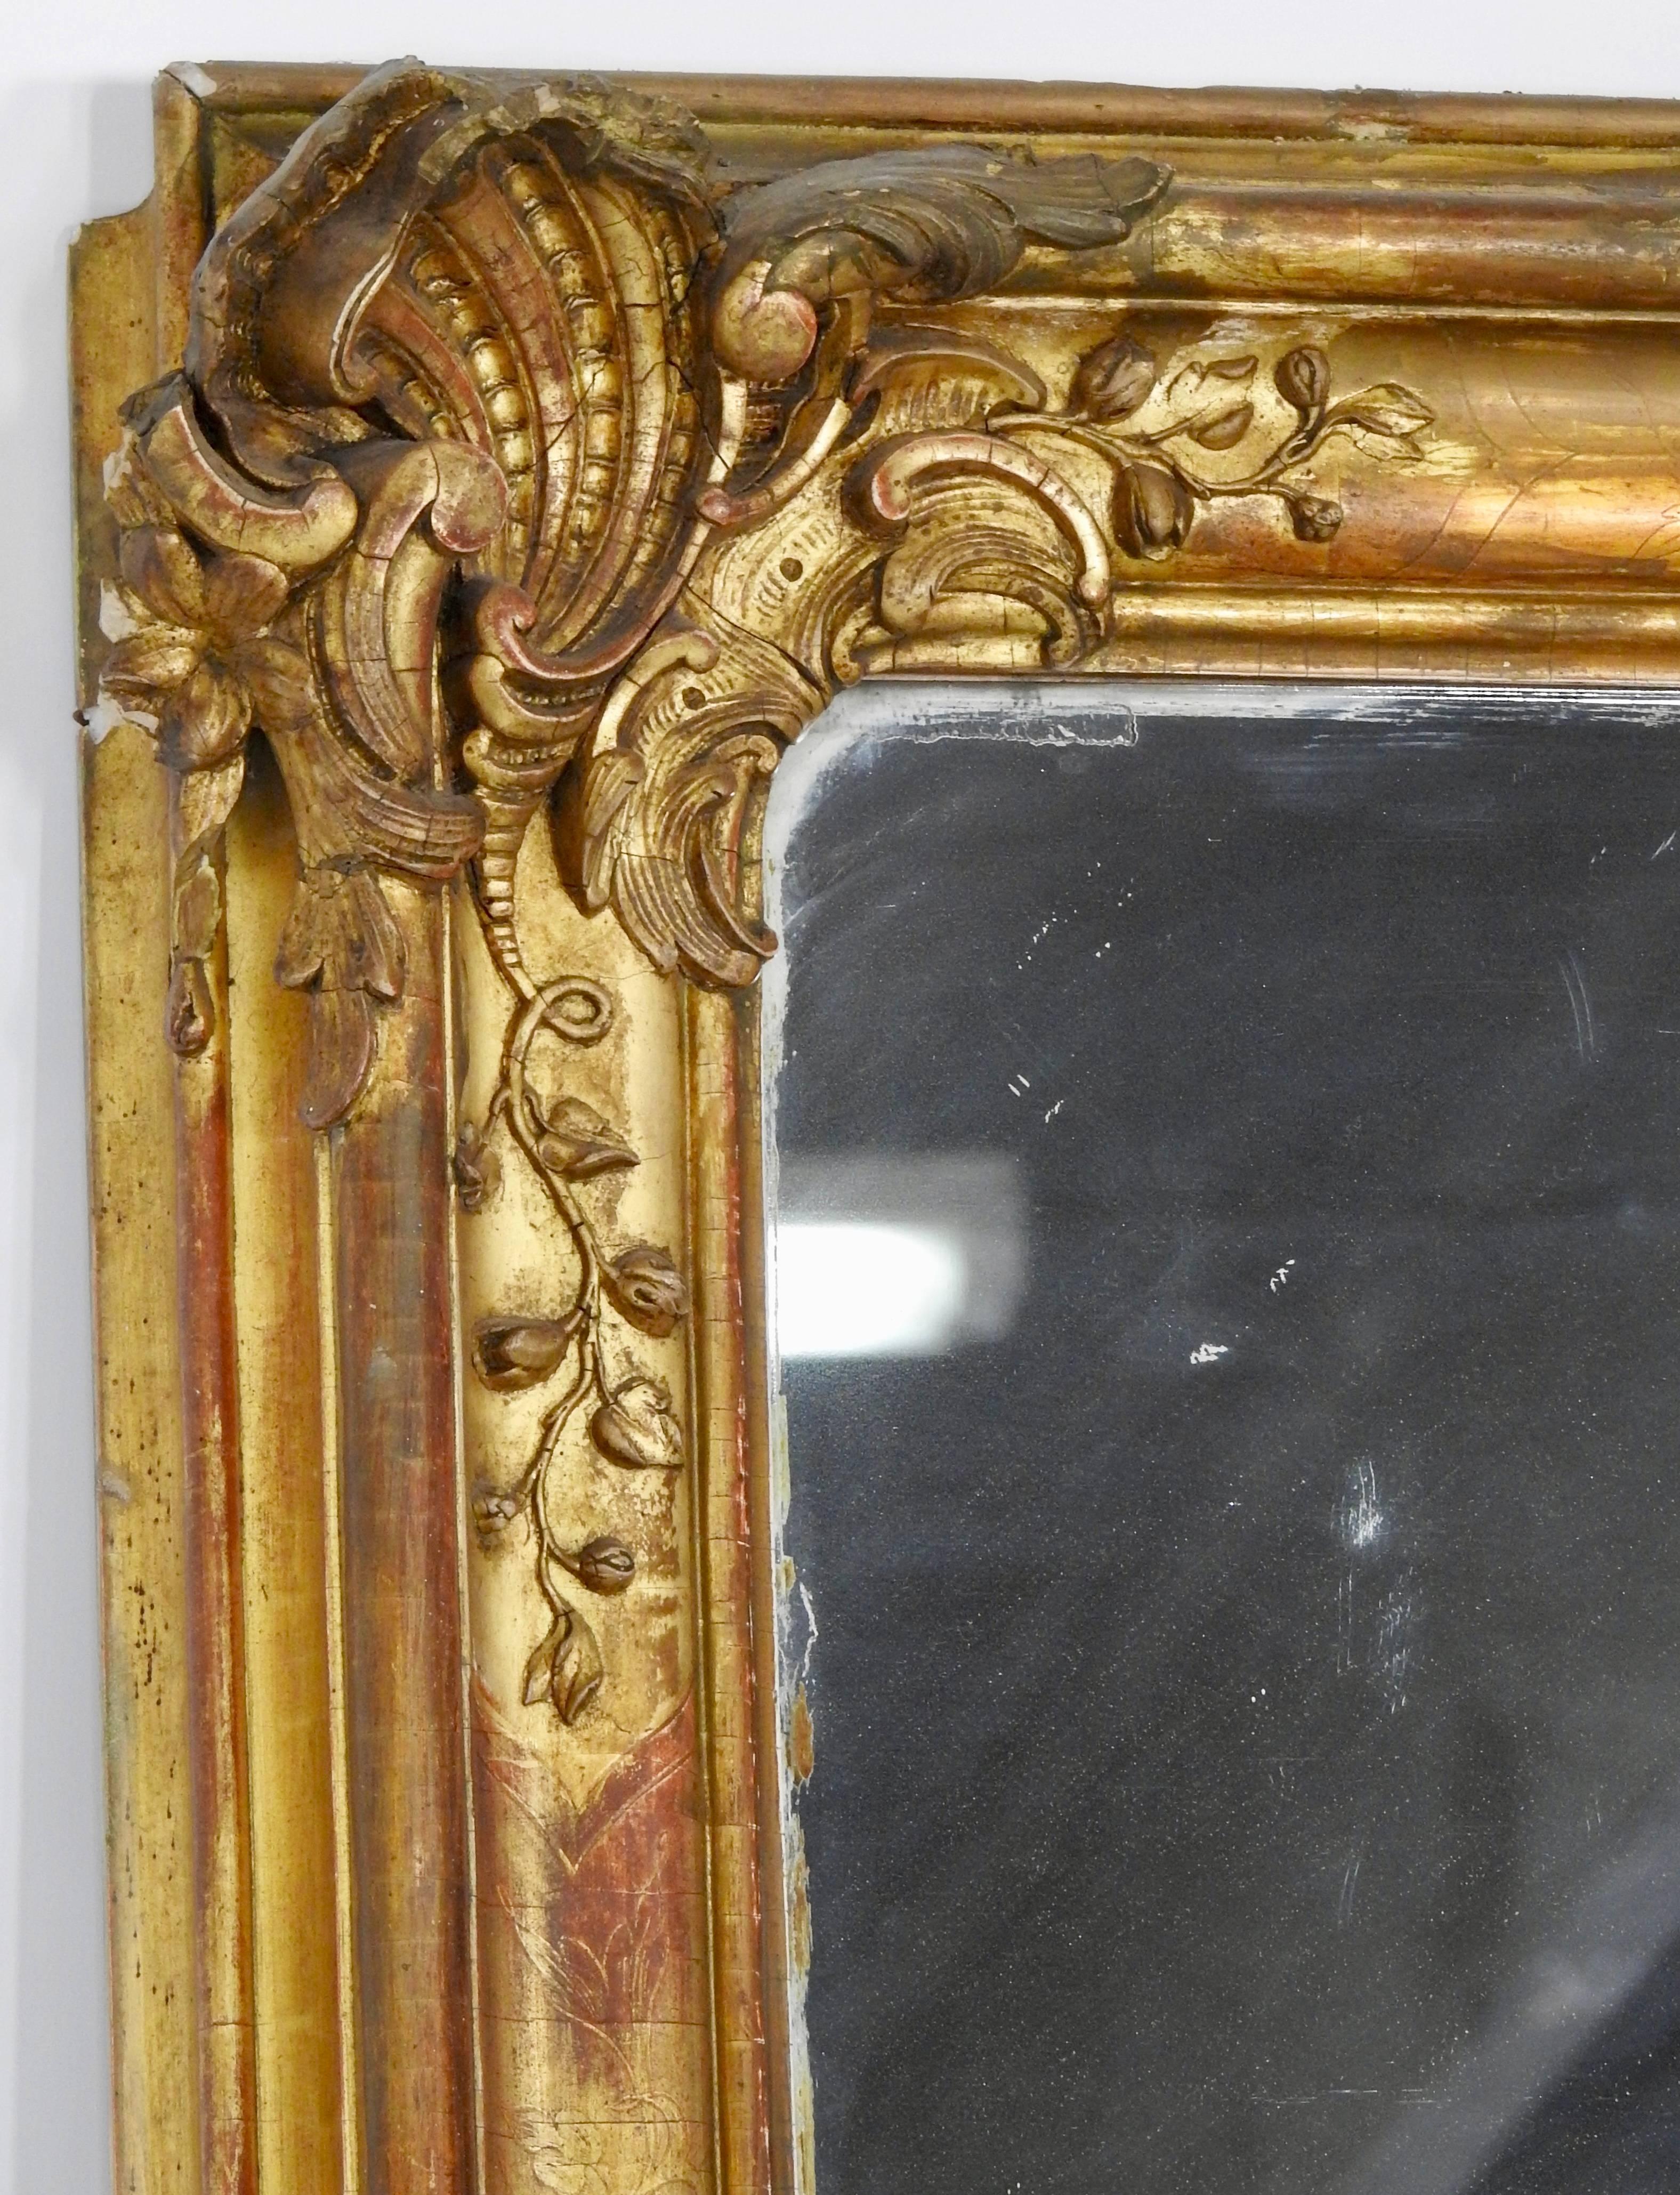 Up for your consideration is a 19th century gilded wood mirror from France. Detailed vines with floral and scroll embellishments accent this lovely mirror. The gilt work is over a finely done gesso and rabbit skin glue giving it that warm glow. Aged